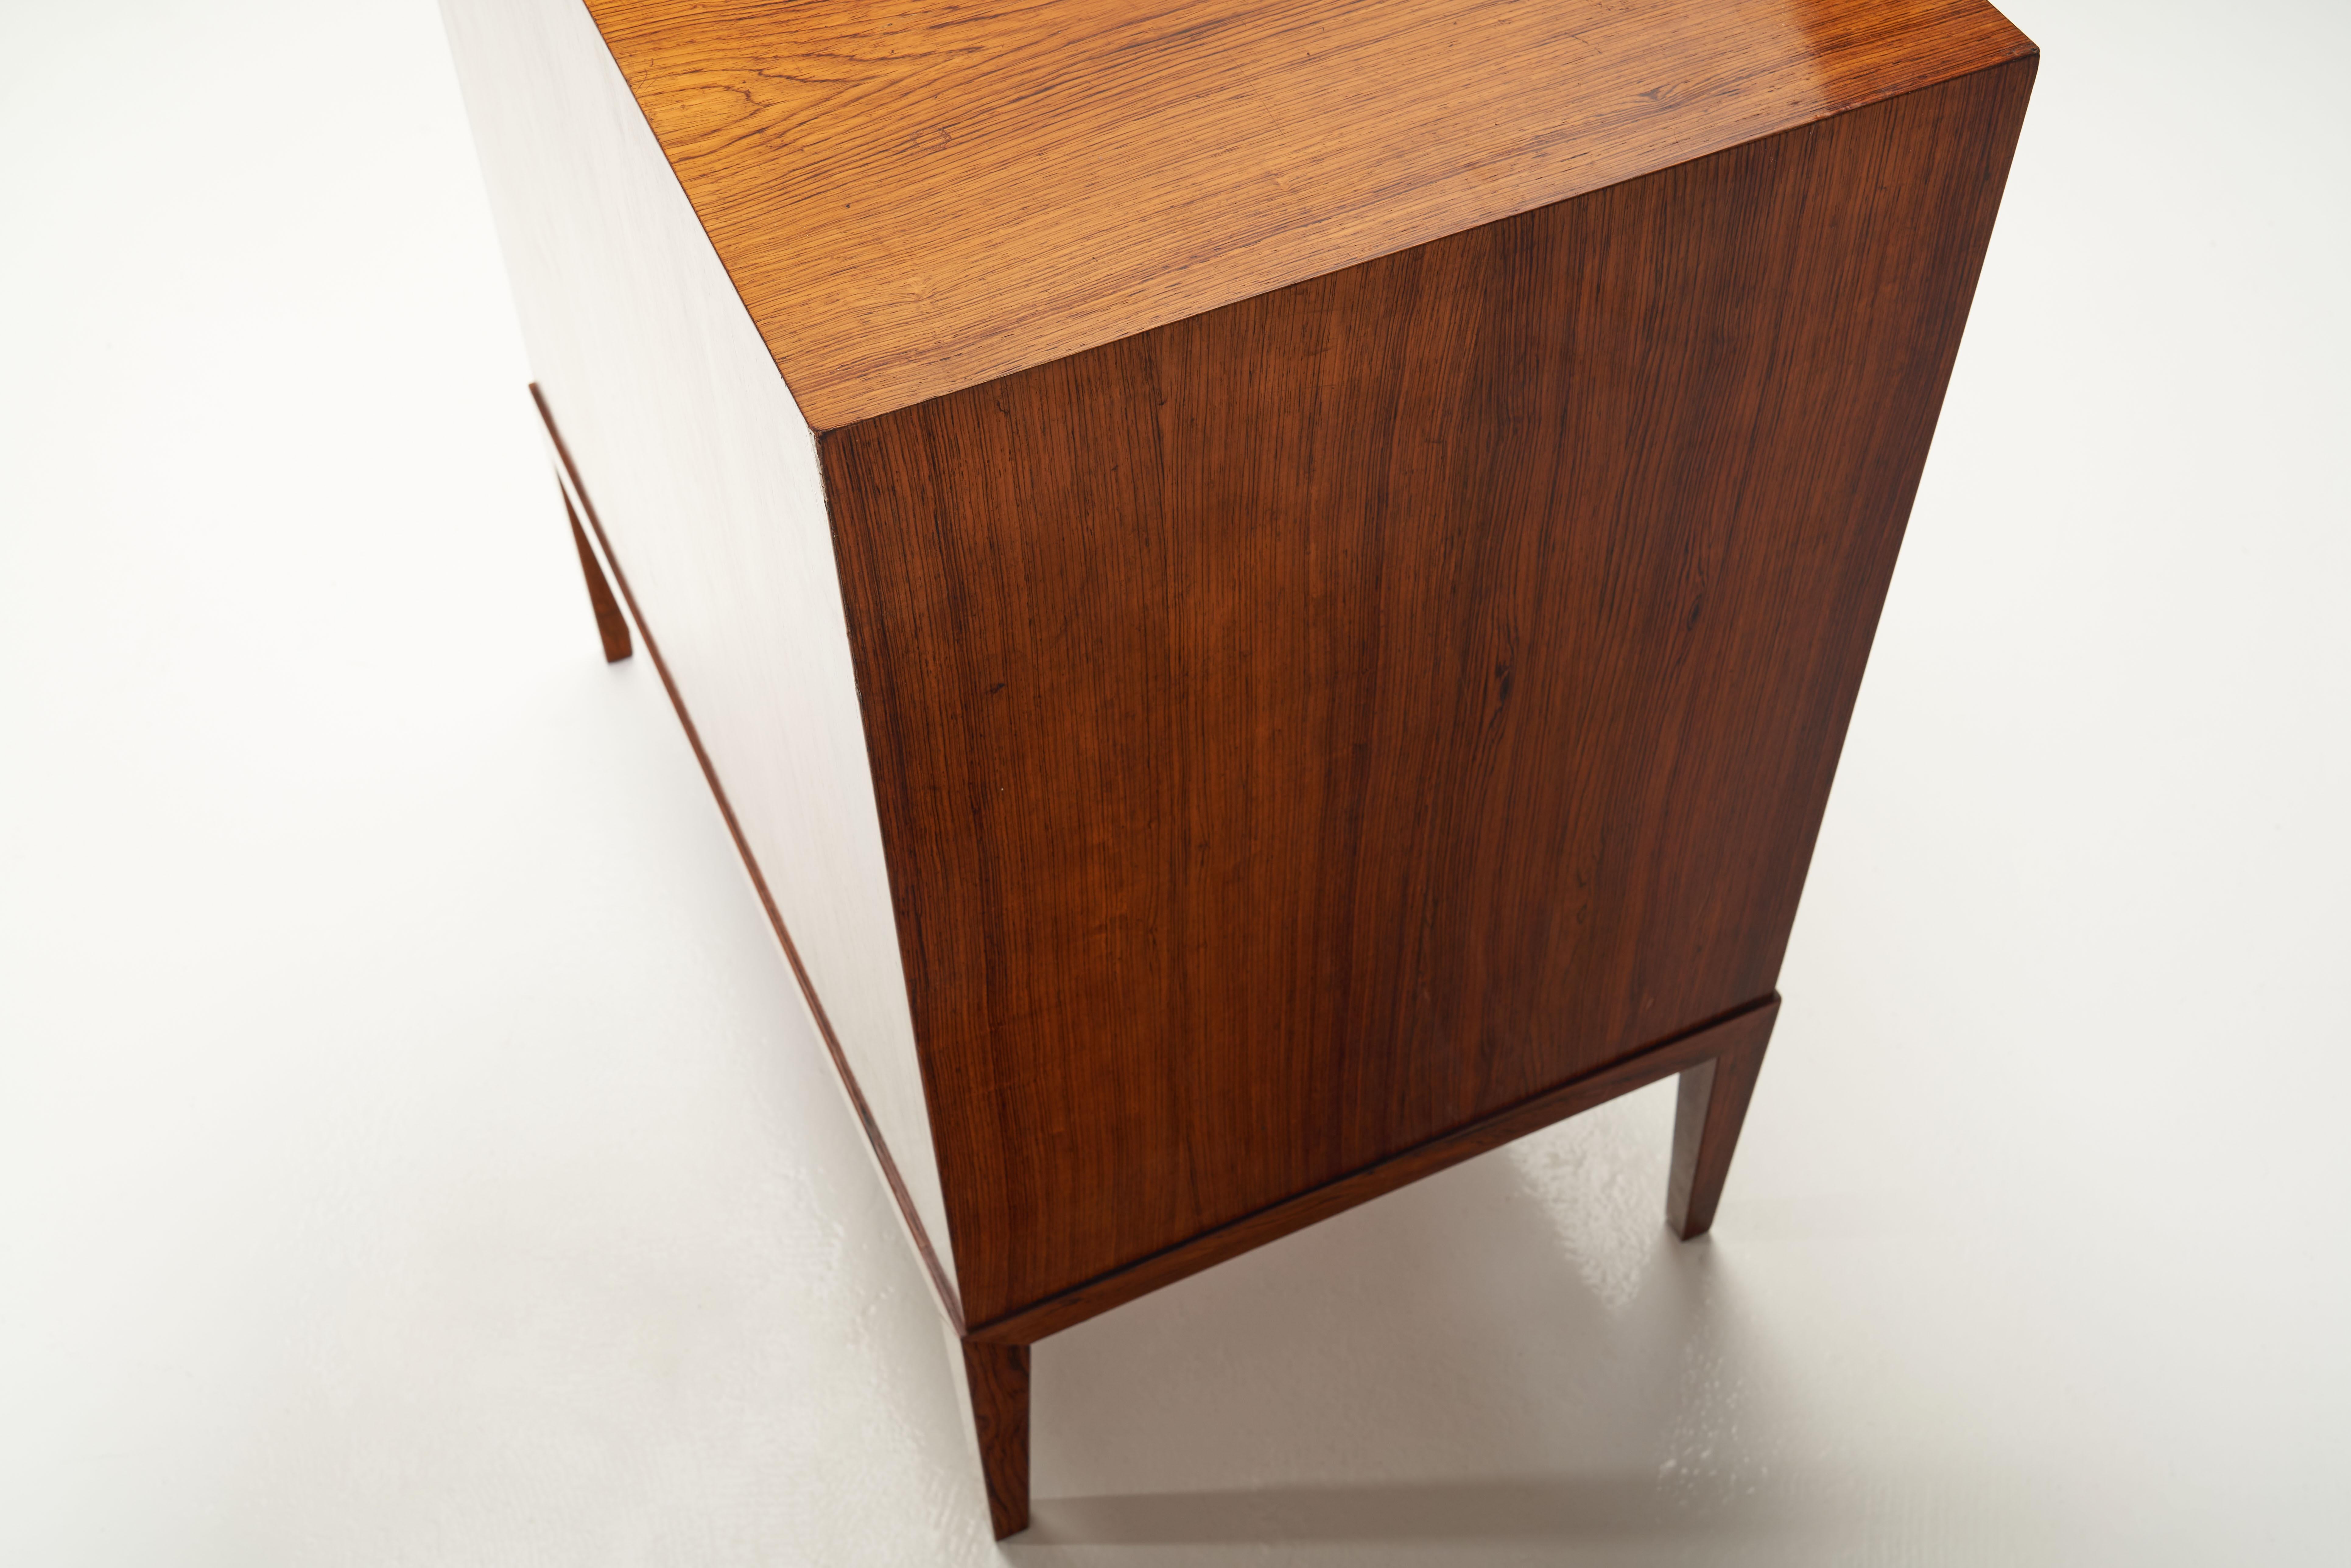 Frits Henningsen Solid Wood Cabinet with Tambour Door, Denmark, 1950s For Sale 13